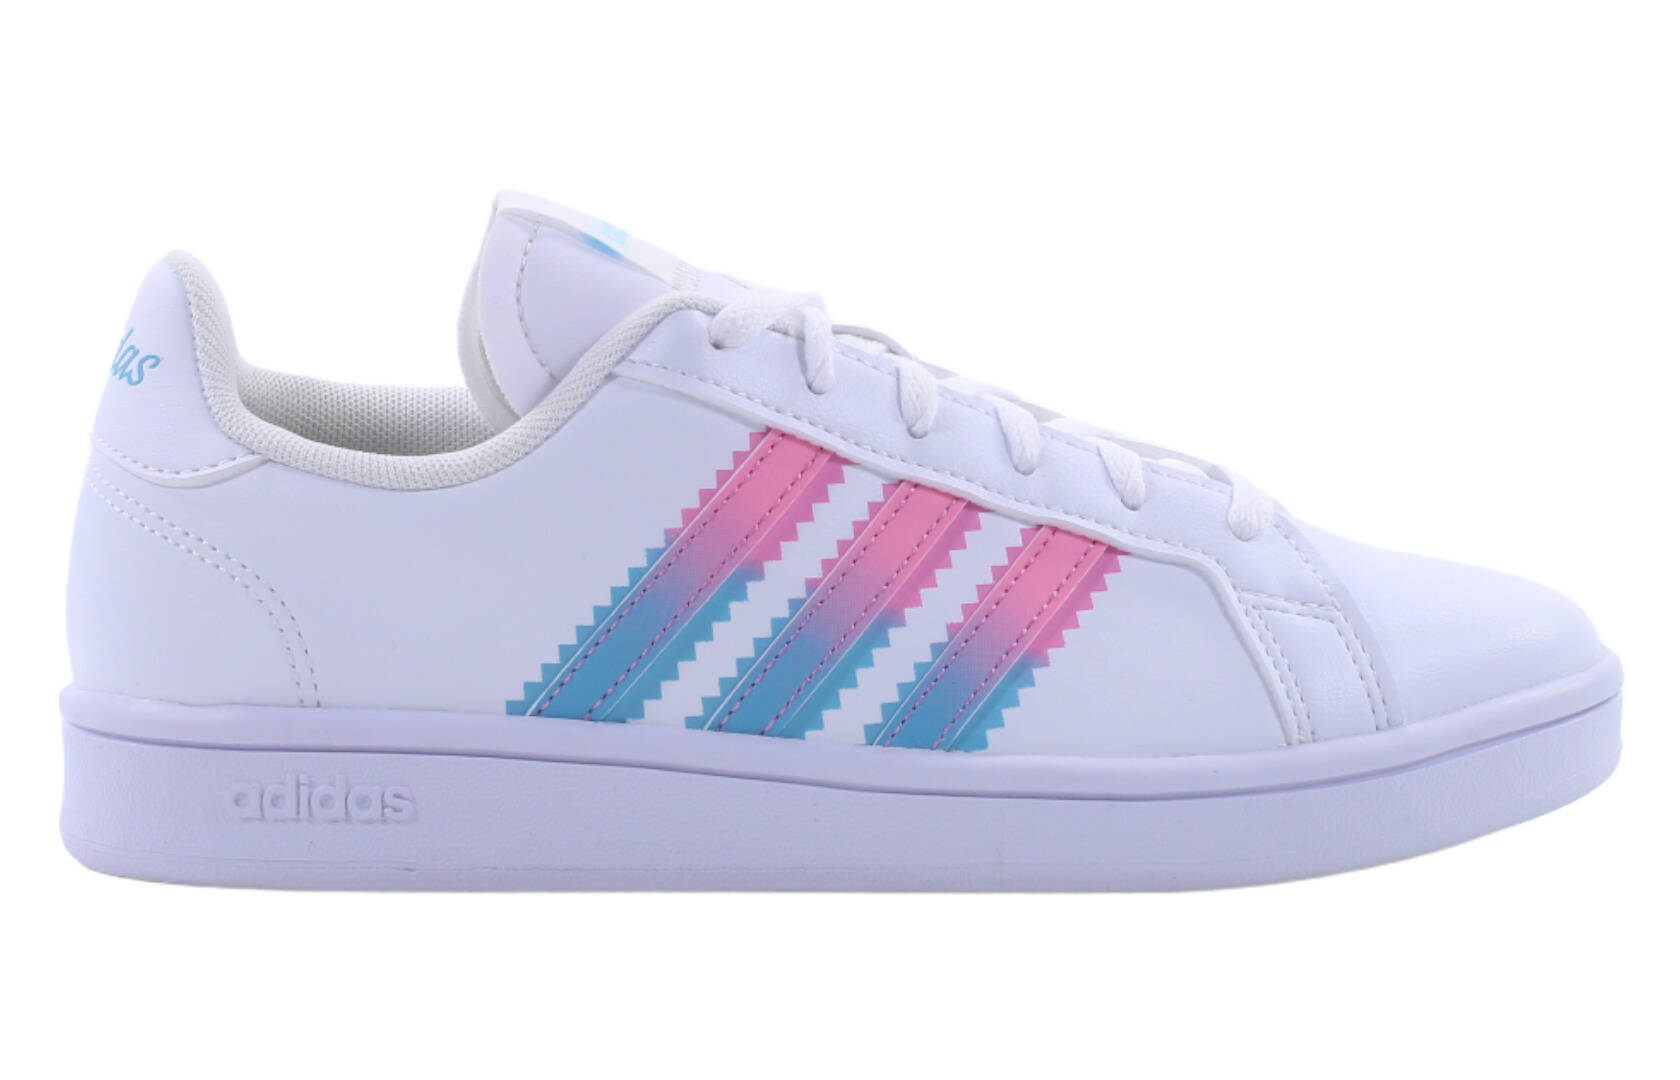 Adidas GRAND COURT BEYOND GY9632 women's shoes